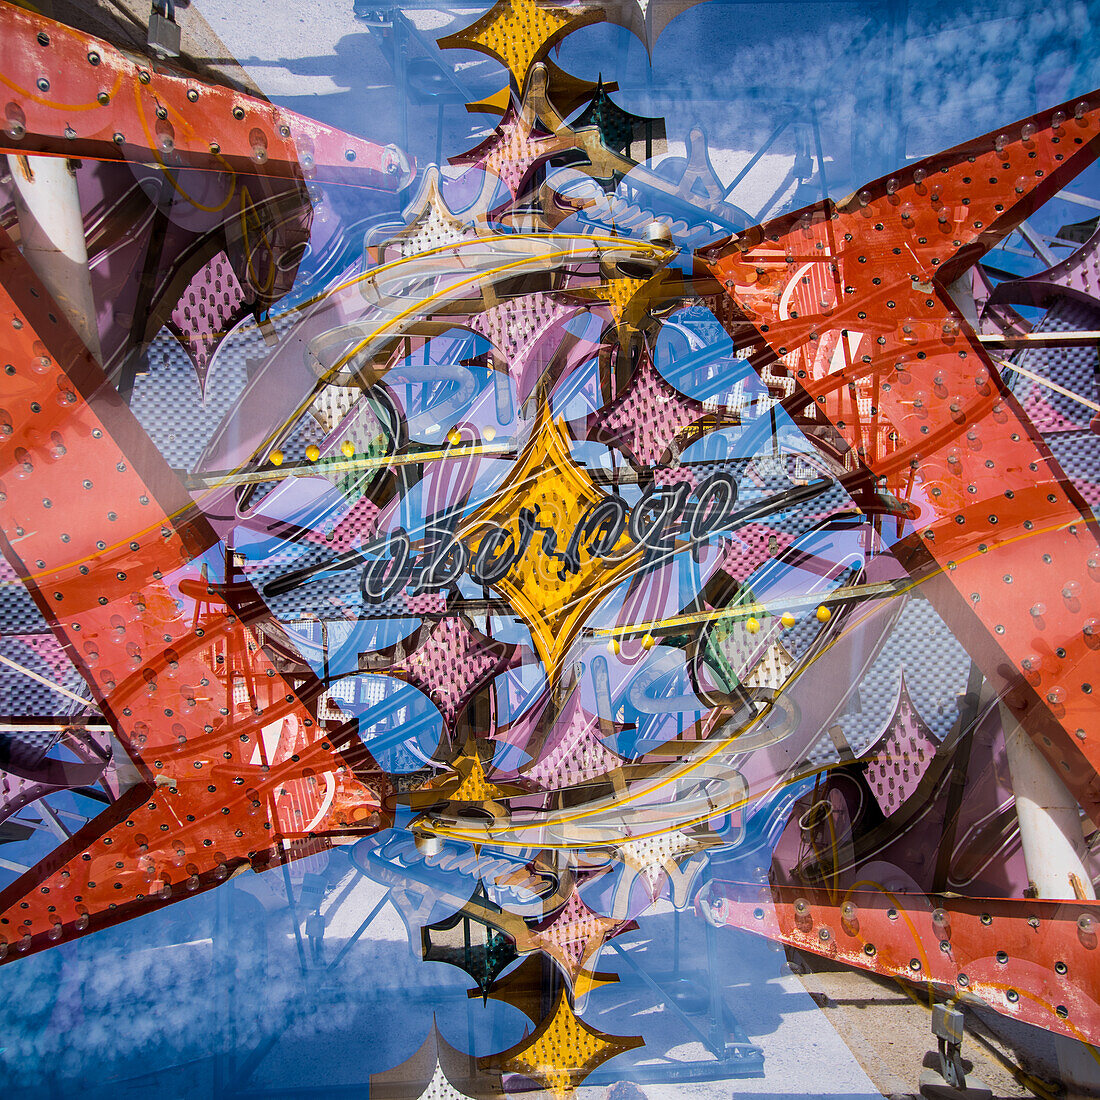 Double exposure of abandoned and discarded neon Stardust and Liberace autograph signs in the Neon Museum aka Neon boneyard in Las Vegas, Nevada.